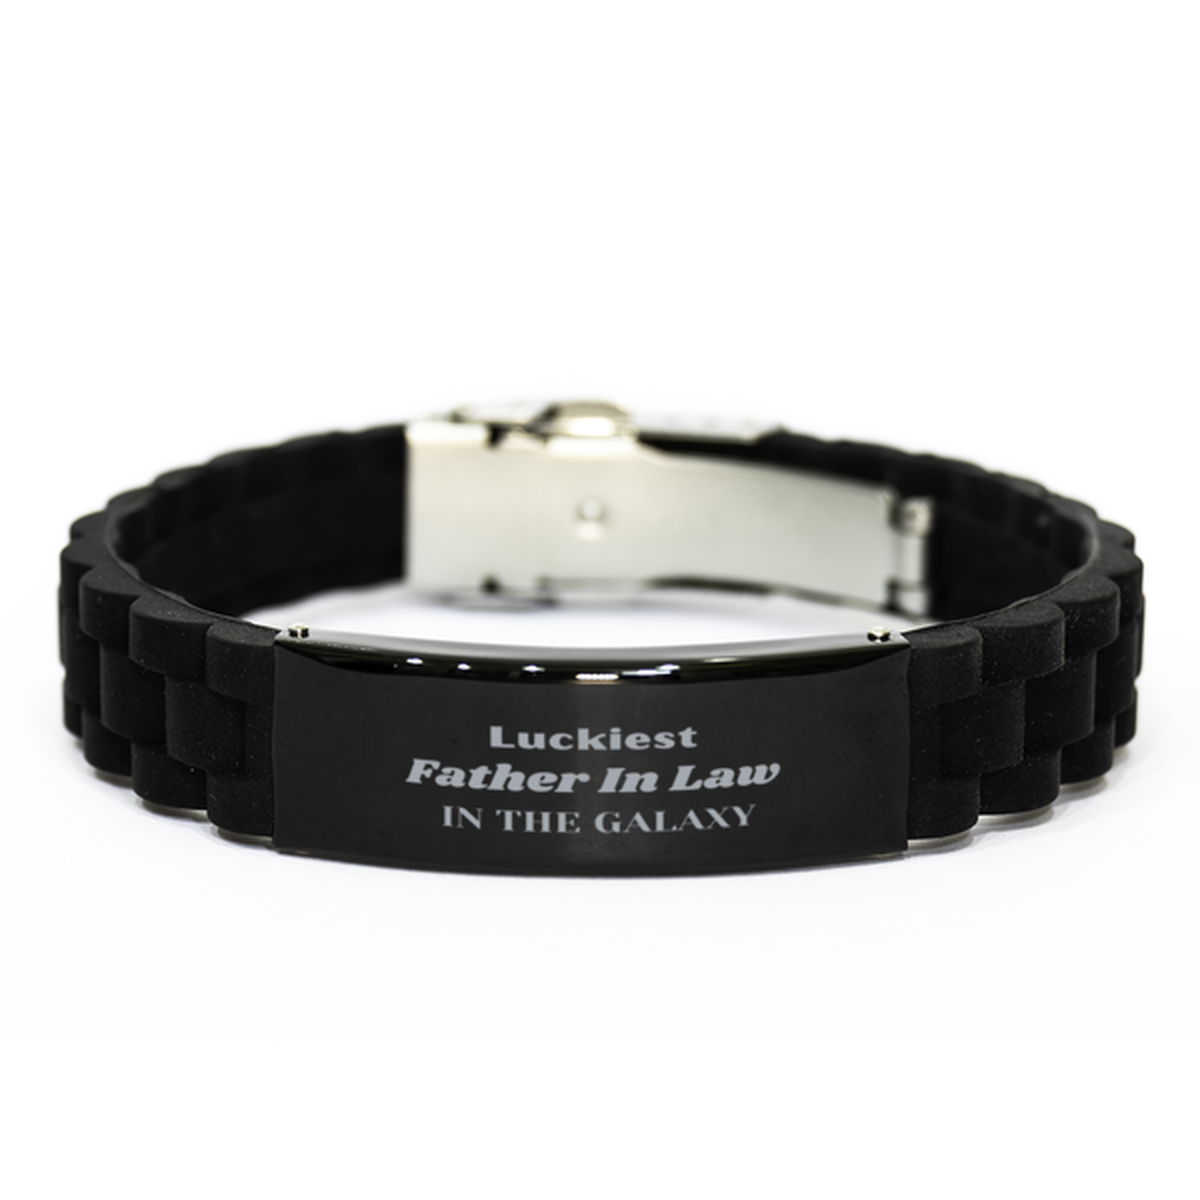 Luckiest Father In Law in the Galaxy, To My Father In Law Engraved Gifts, Christmas Father In Law Black Glidelock Clasp Bracelet Gifts, X-mas Birthday Unique Gifts For Father In Law Men Women